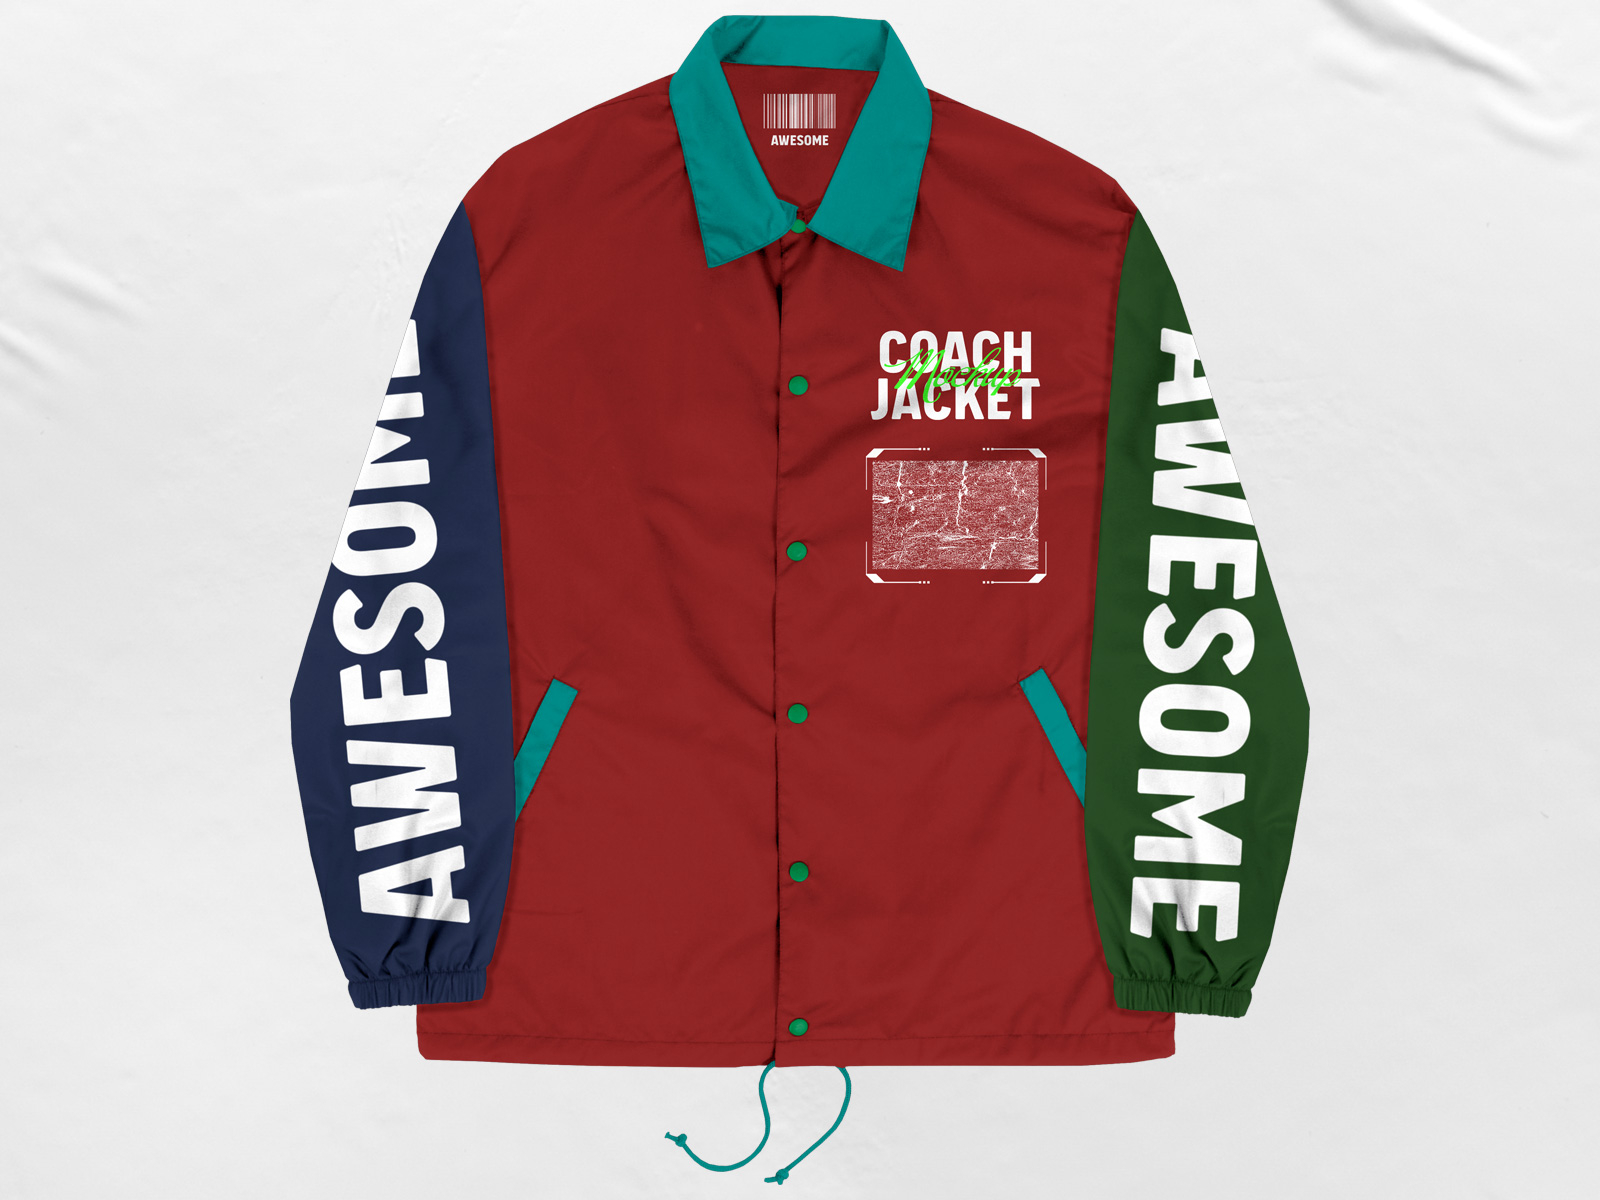 Coach Jacket designs, themes, templates and downloadable graphic